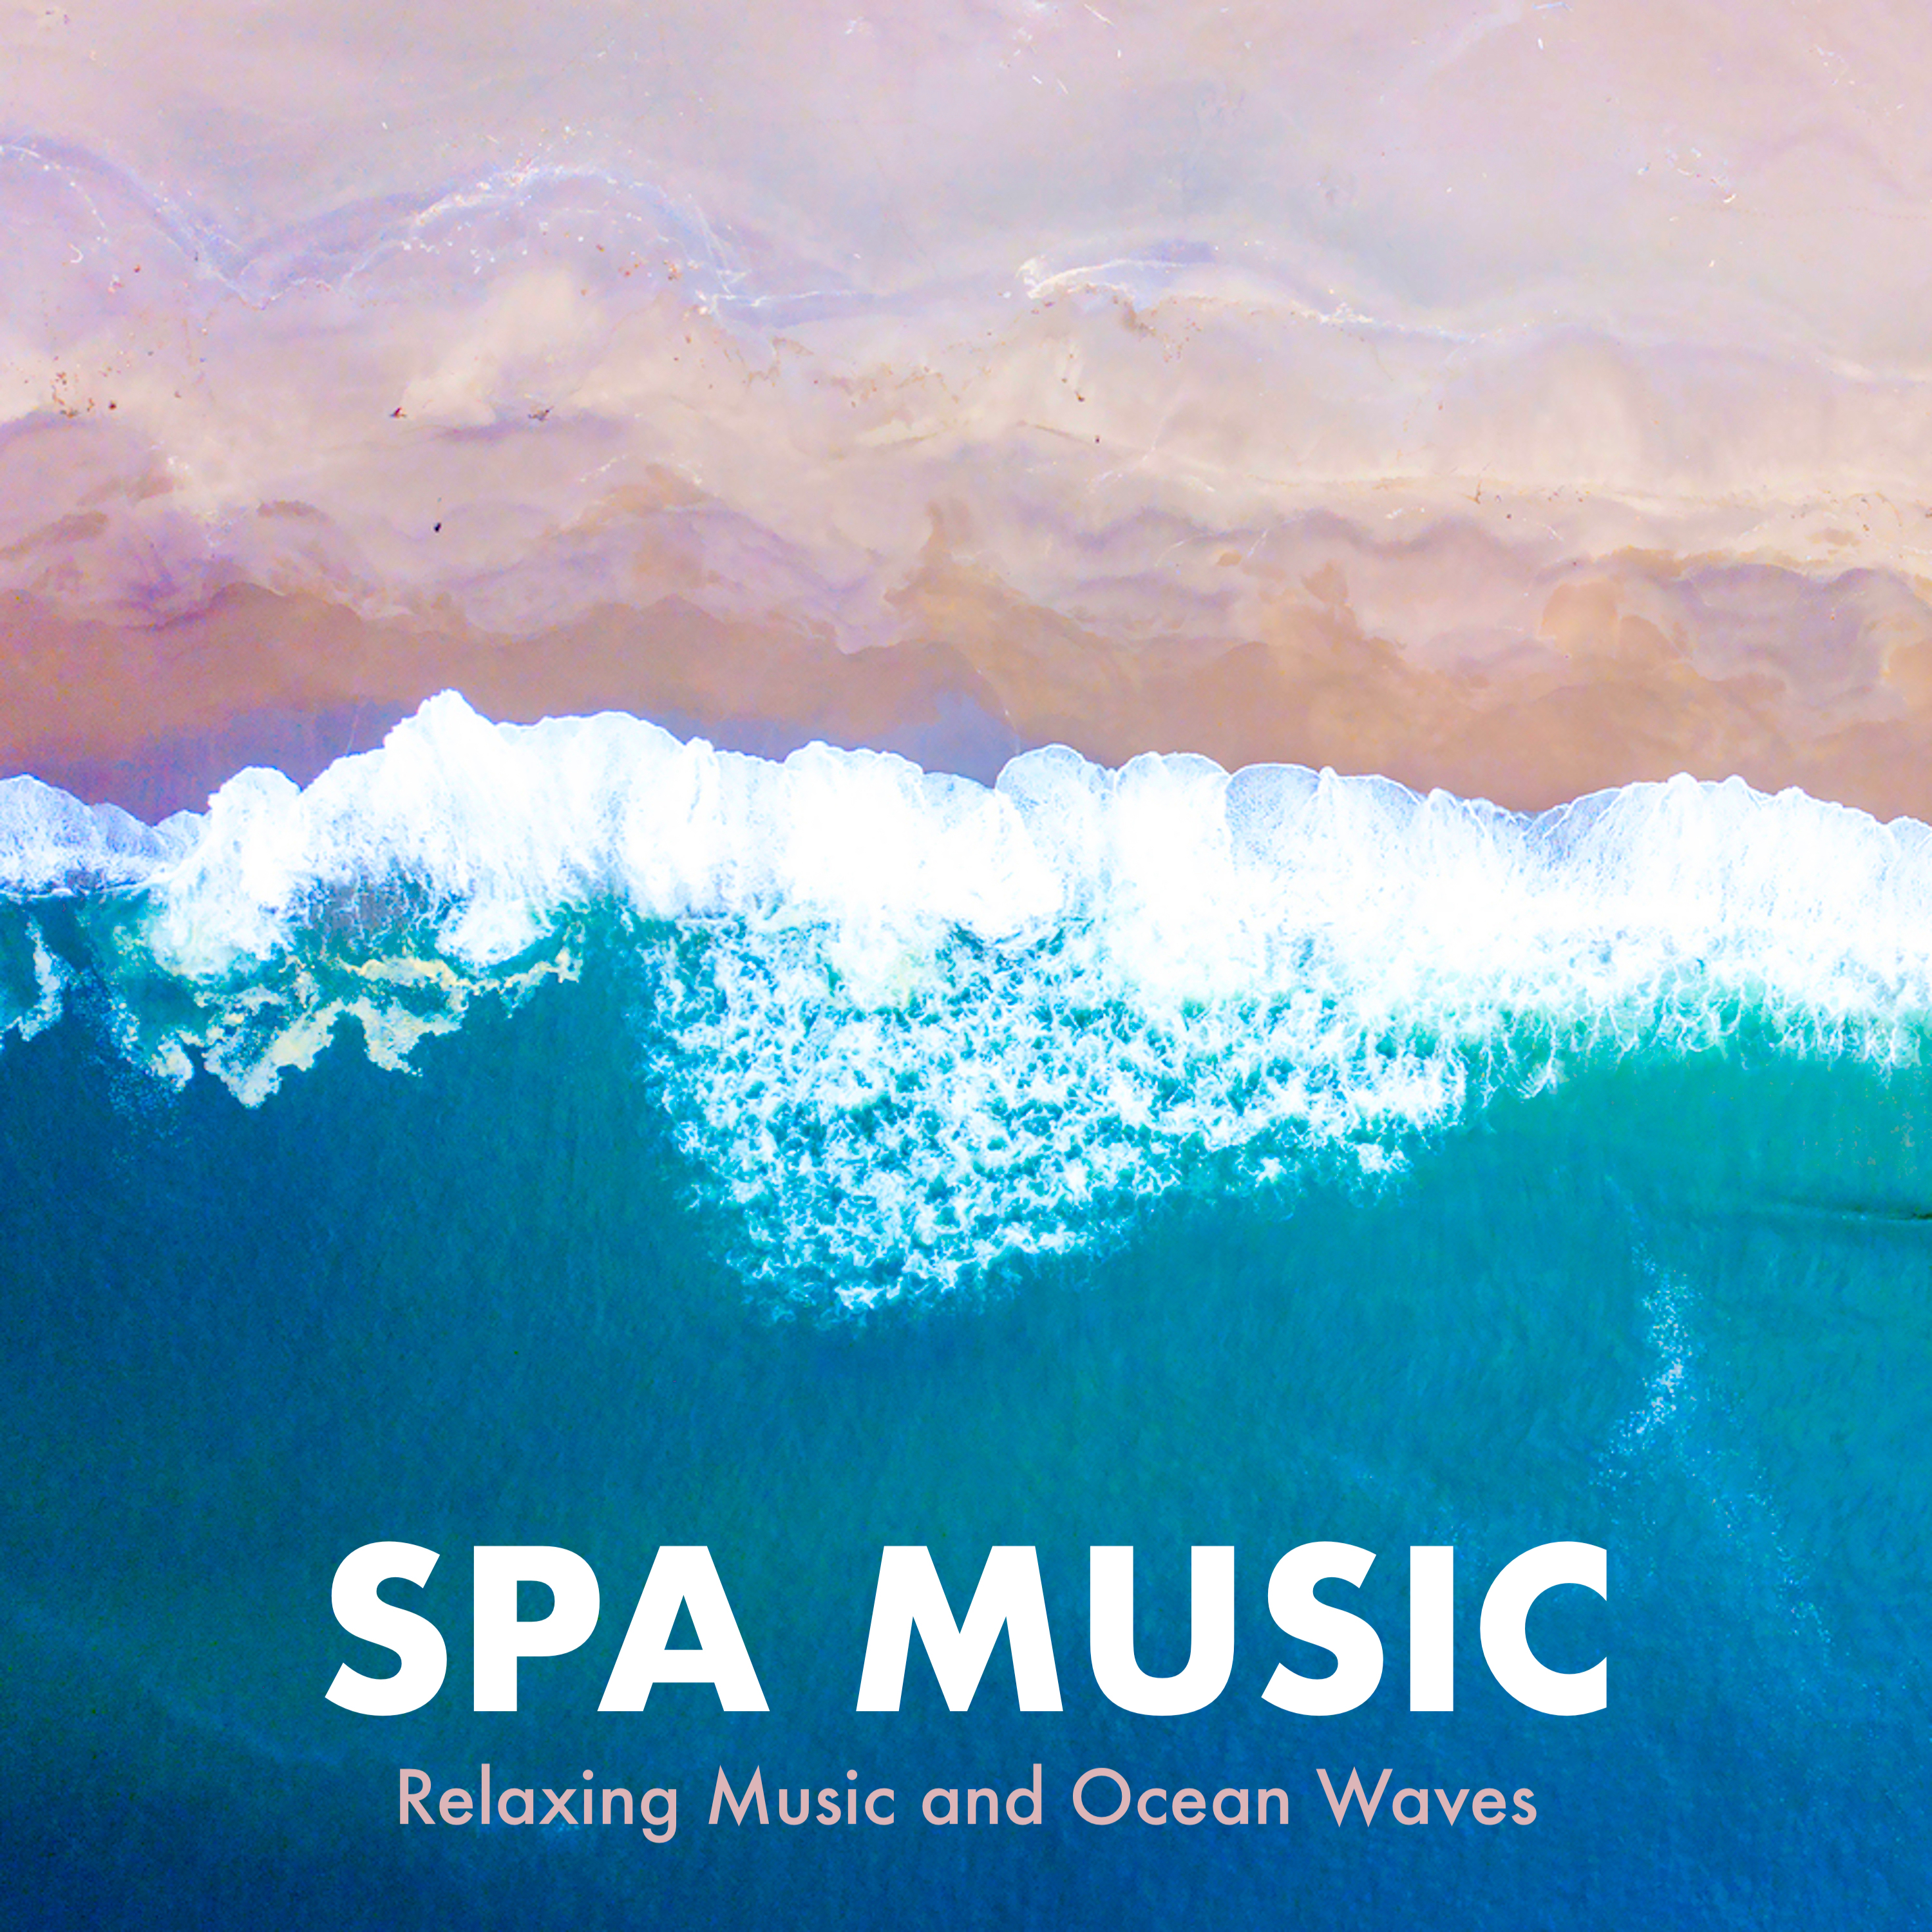 Spa Music: Relaxing Music and Ocean Waves